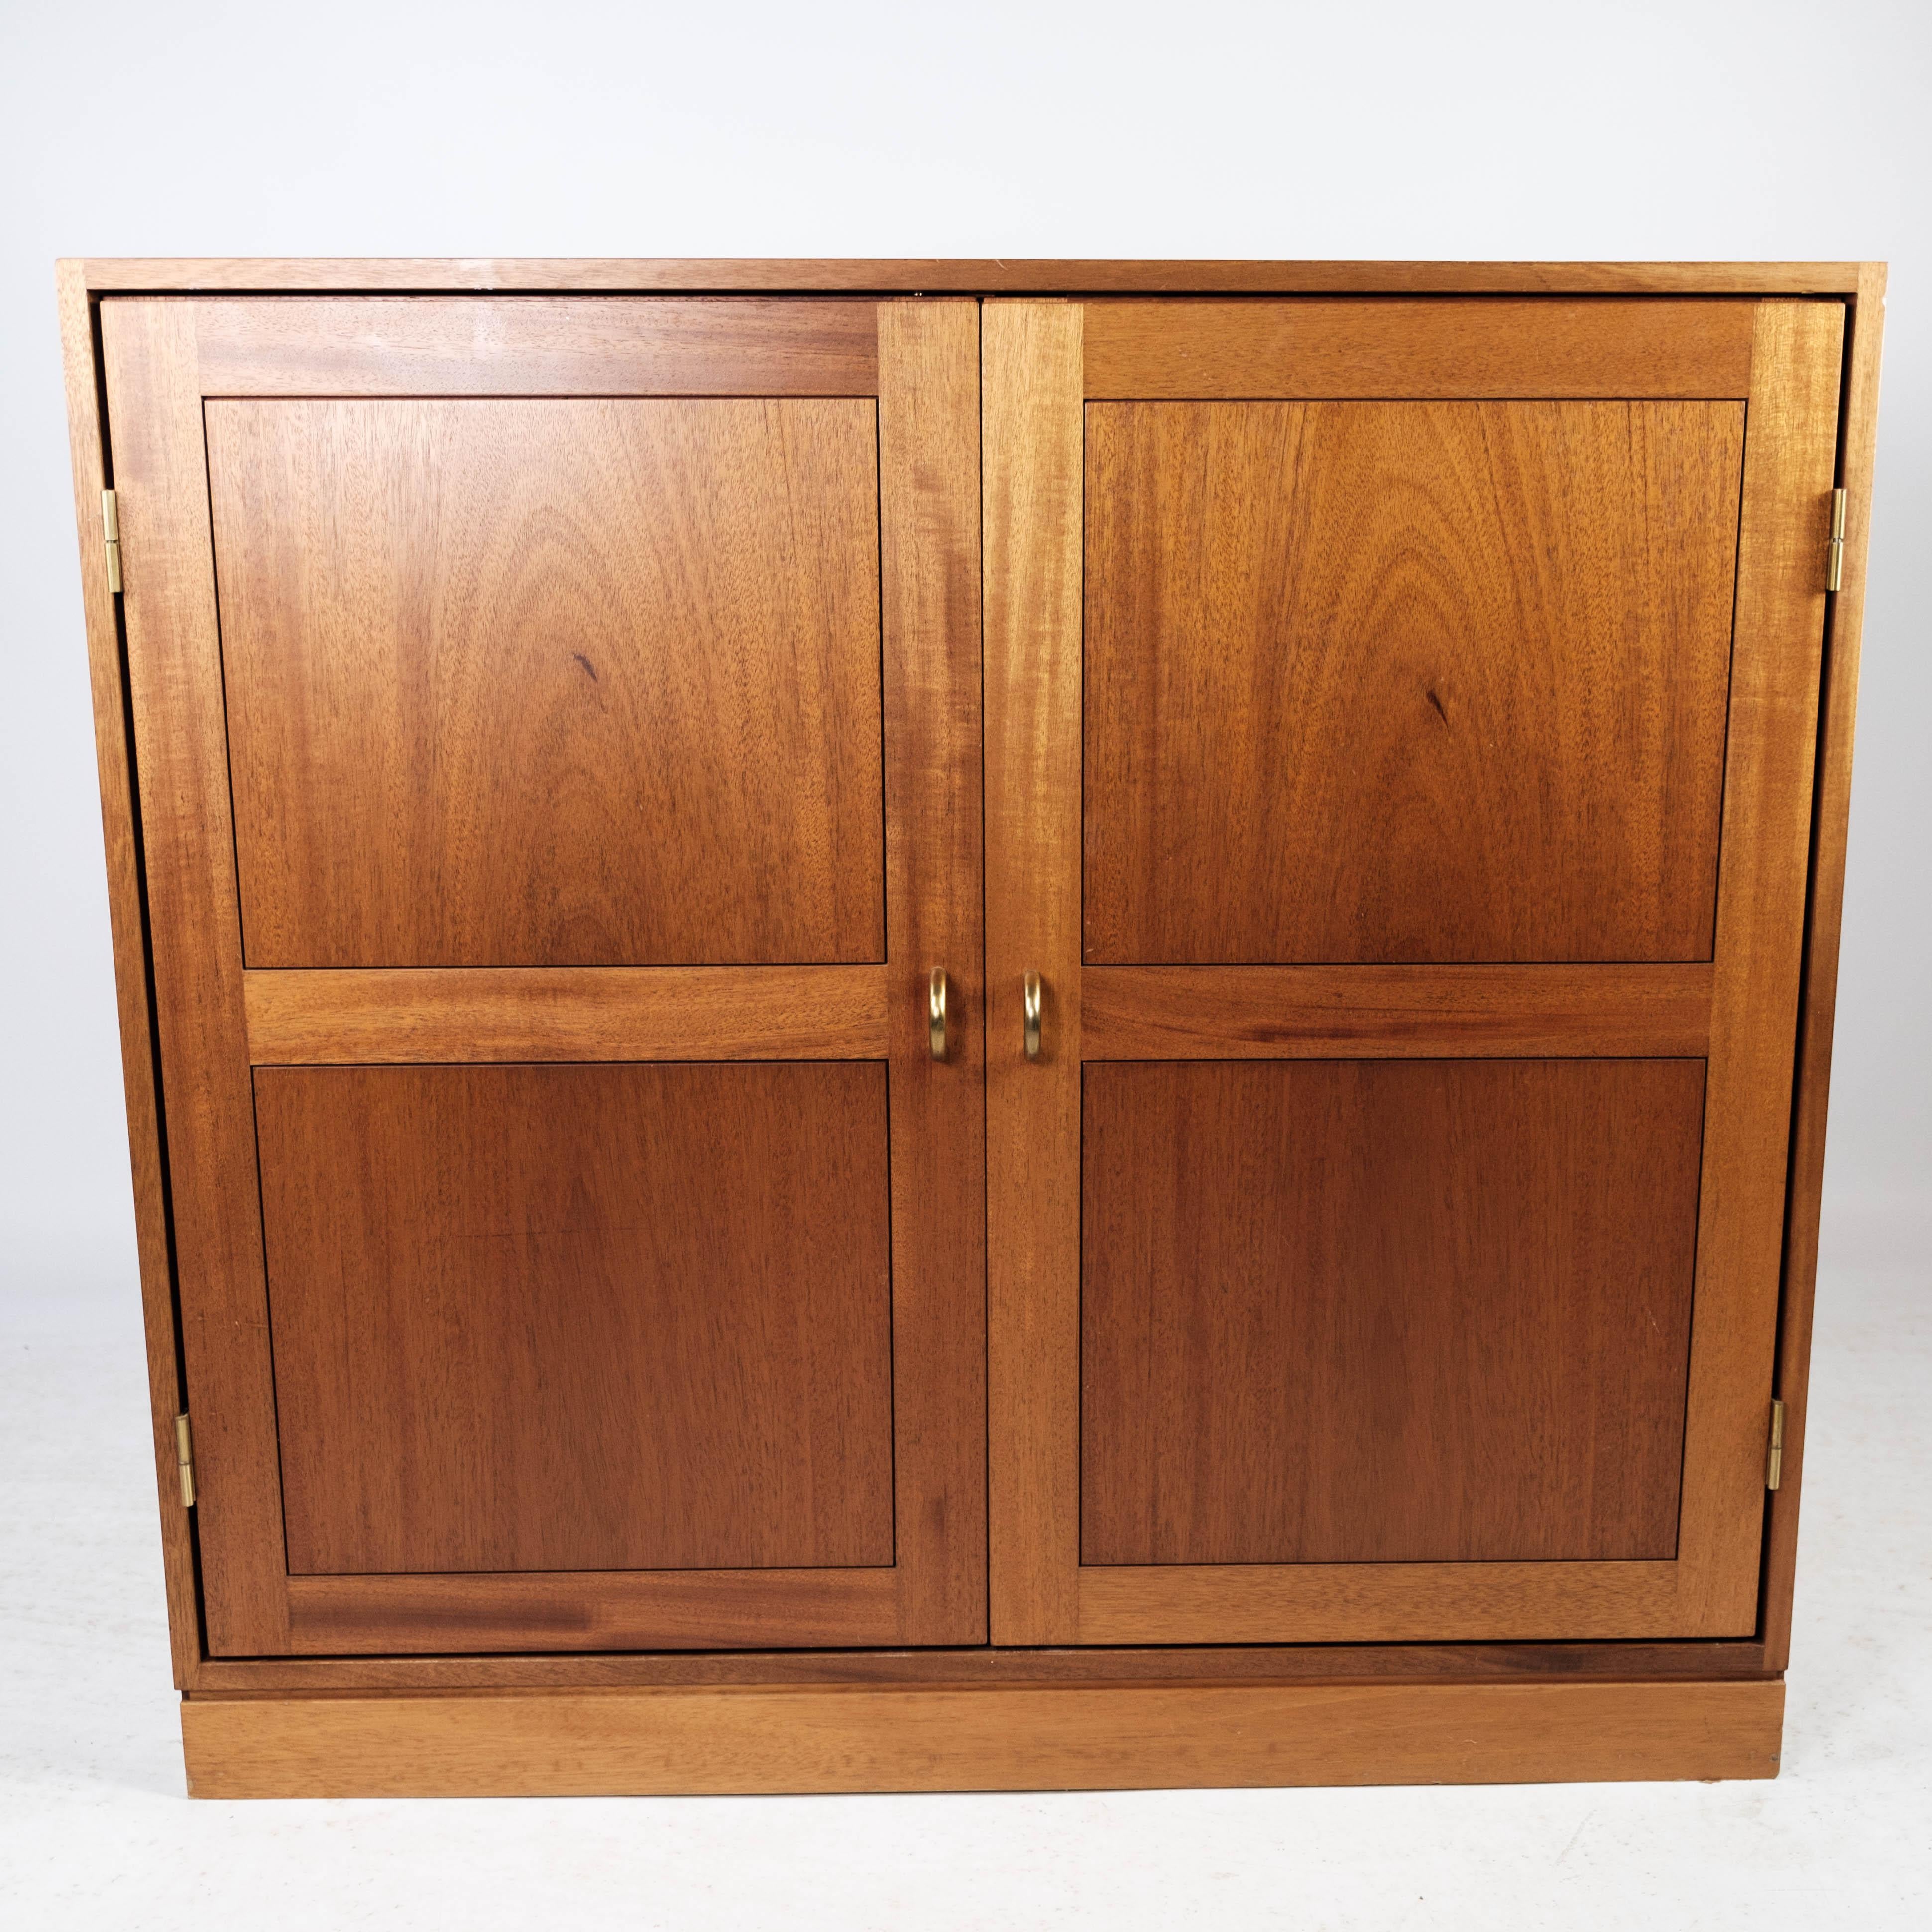 Get an authentic piece of Danish furniture history with this cabinet in light mahogany from the 1960s, created by the renowned Danish company Søborg Møbler. This cabinet is an iconic example of Danish design from this era, combining timeless